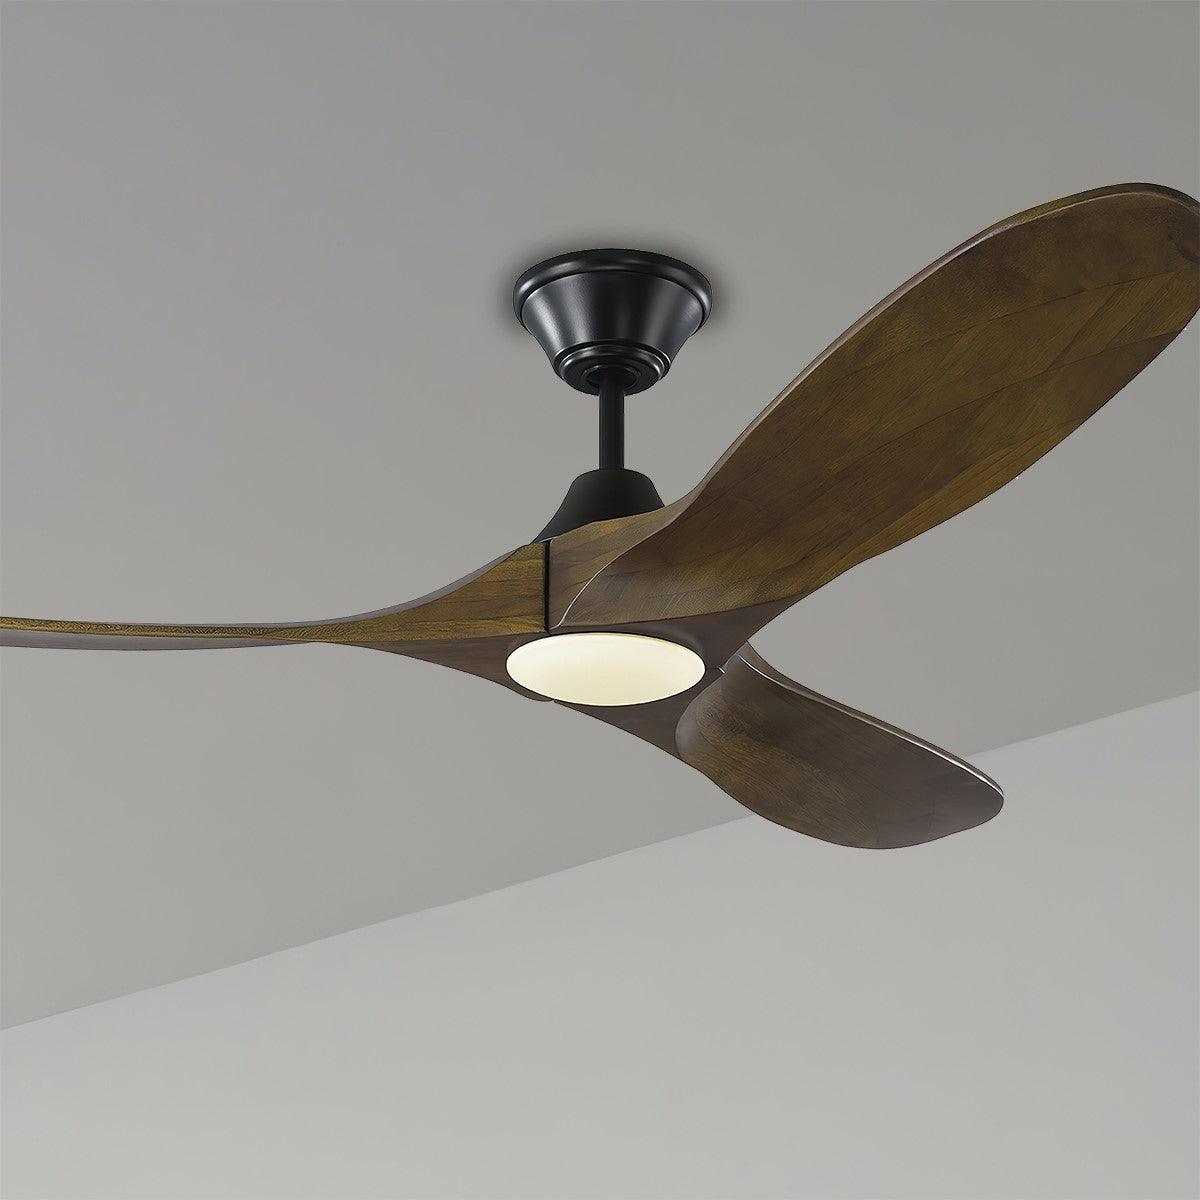 Maverick II 52 Inch LED Modern Outdoor Ceiling Fan With Light And Remote